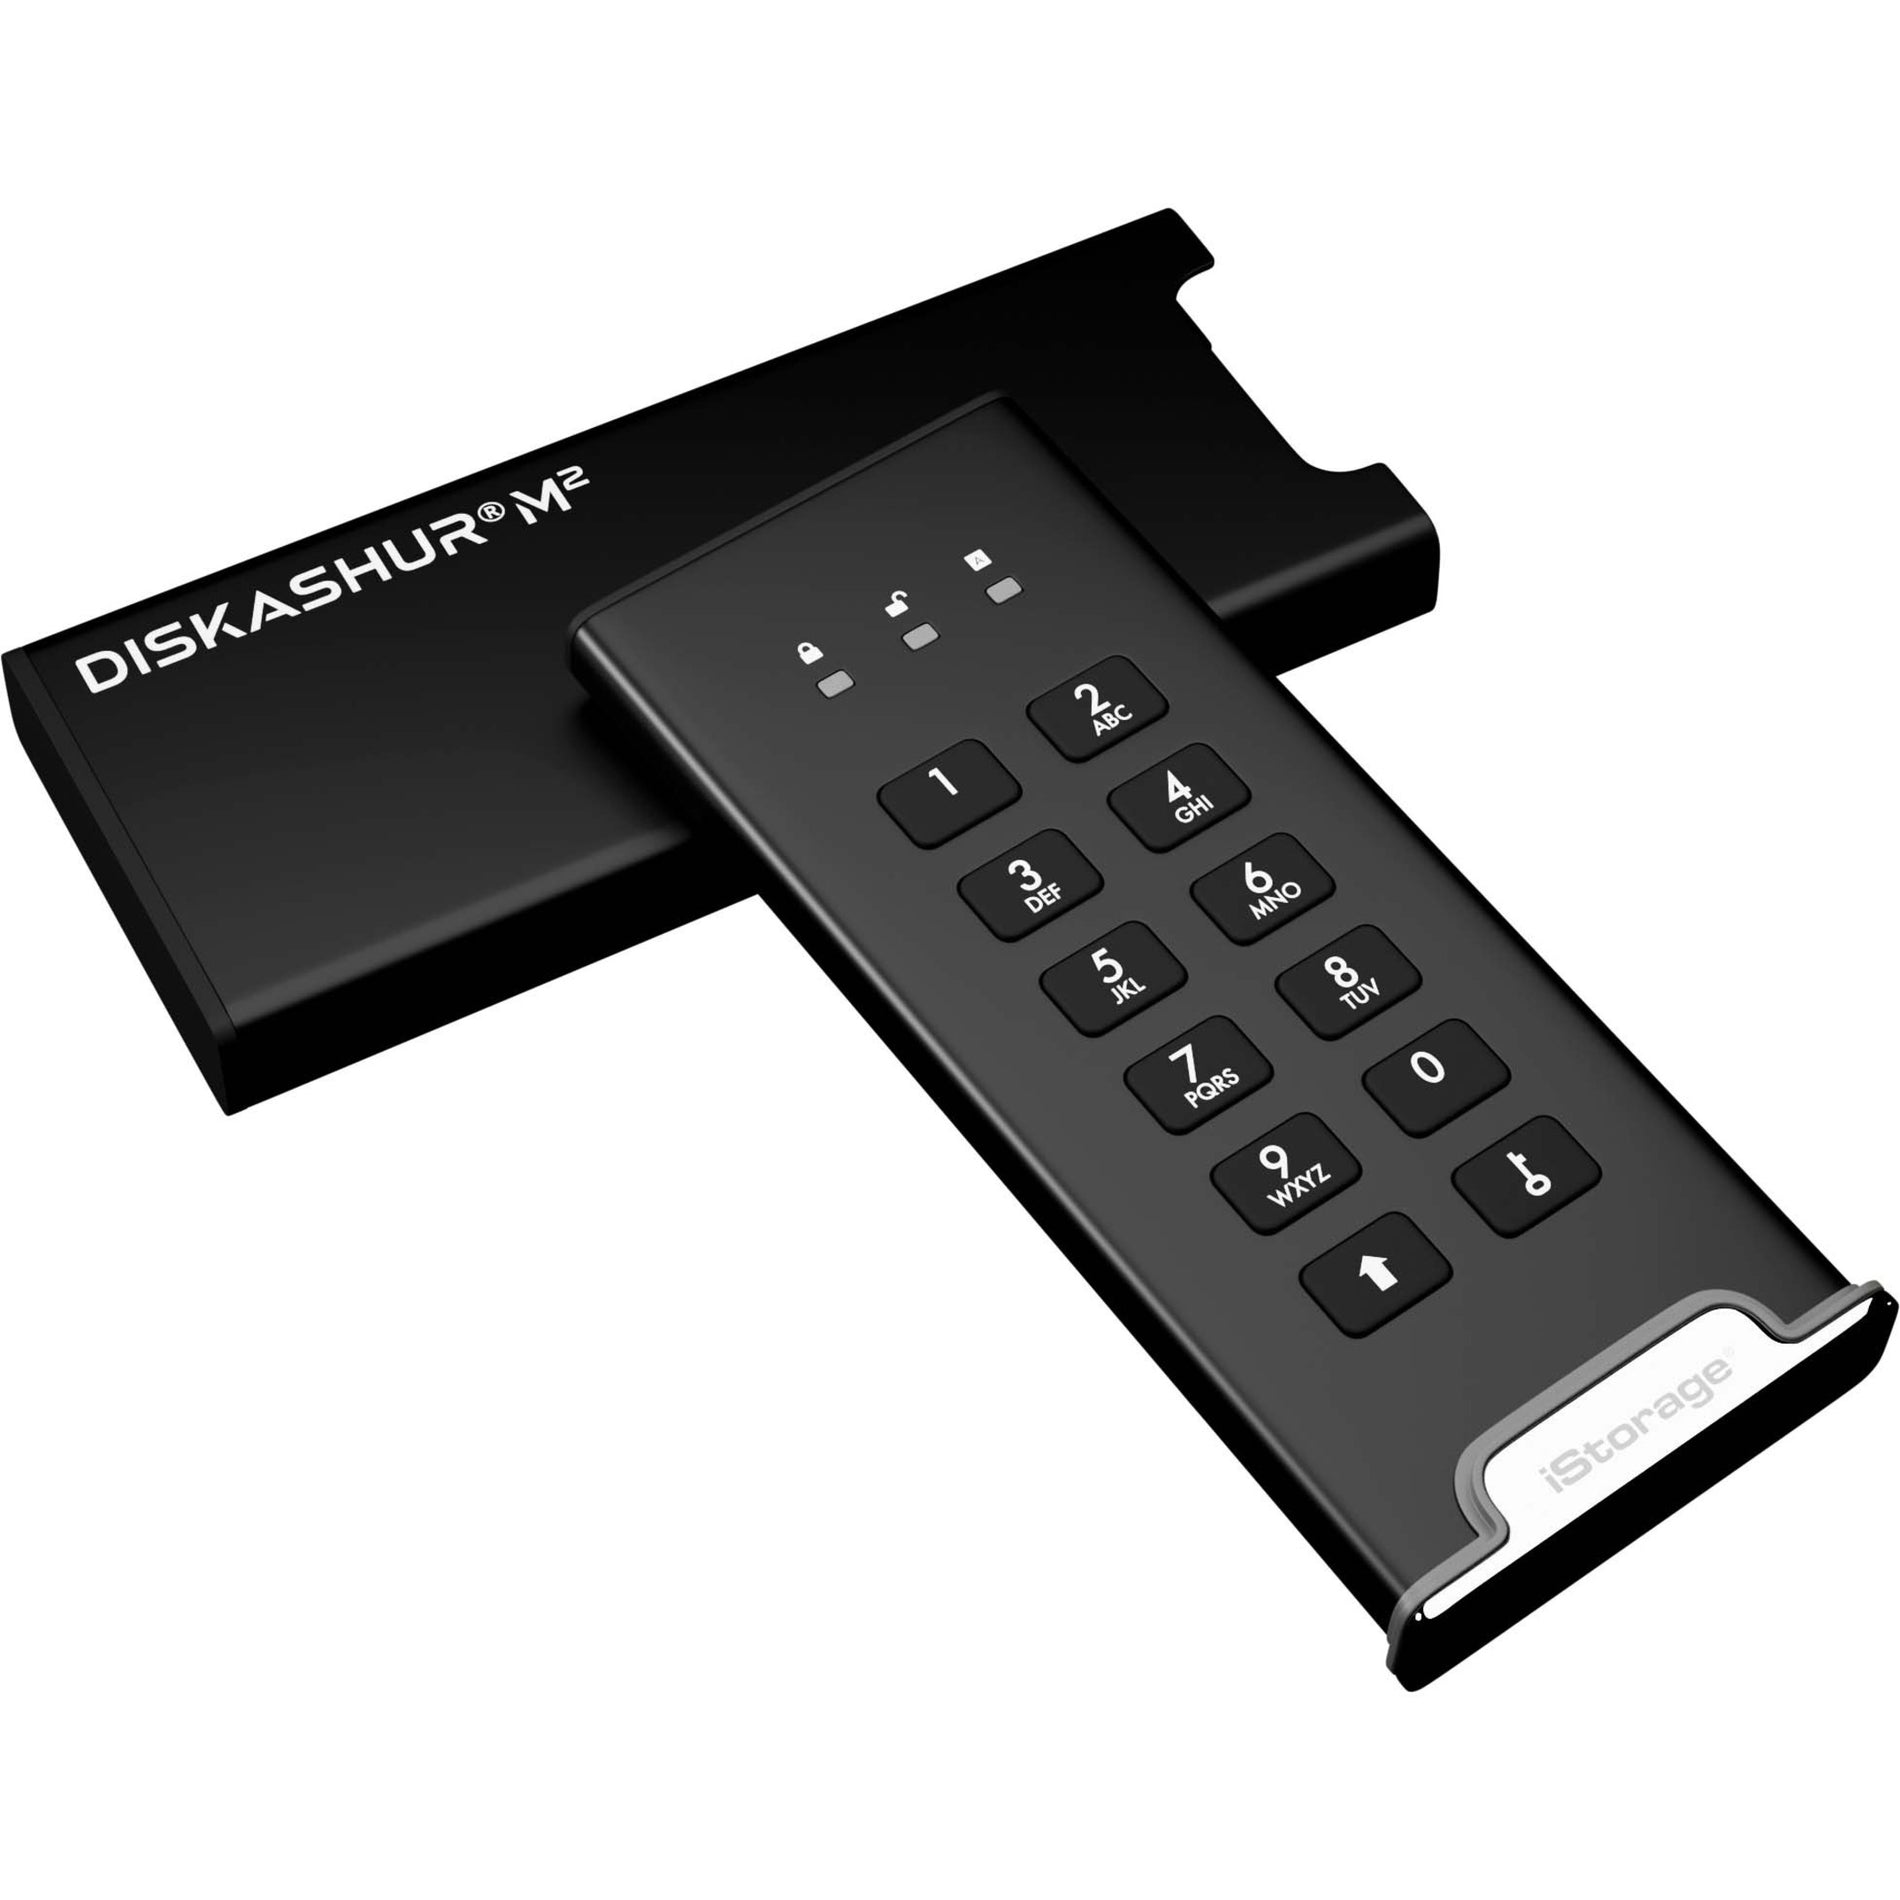 iStorage IS-DAM2-256-1000 diskAshur M2 Portable SSD, PIN Authenticated, Hardware Encrypted, 1TB, USB 3.2, Ultra-fast, FIPS Compliant, Rugged & Portable